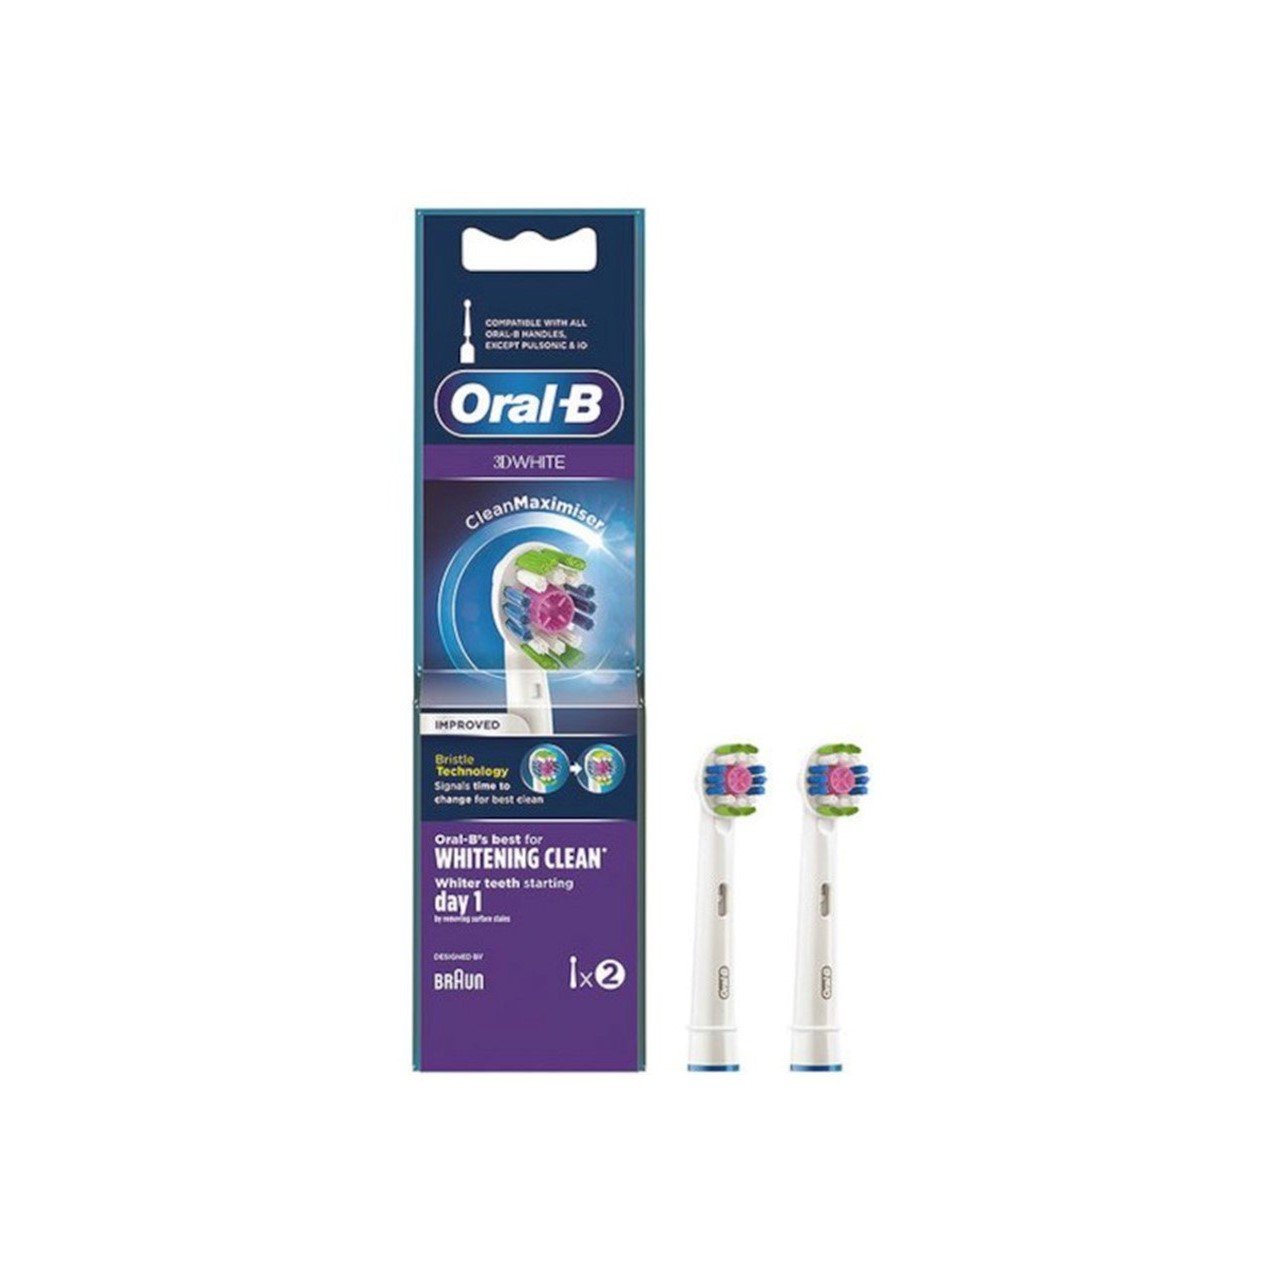 Oral-B 3D White Replacement Head Electric Toothbrush